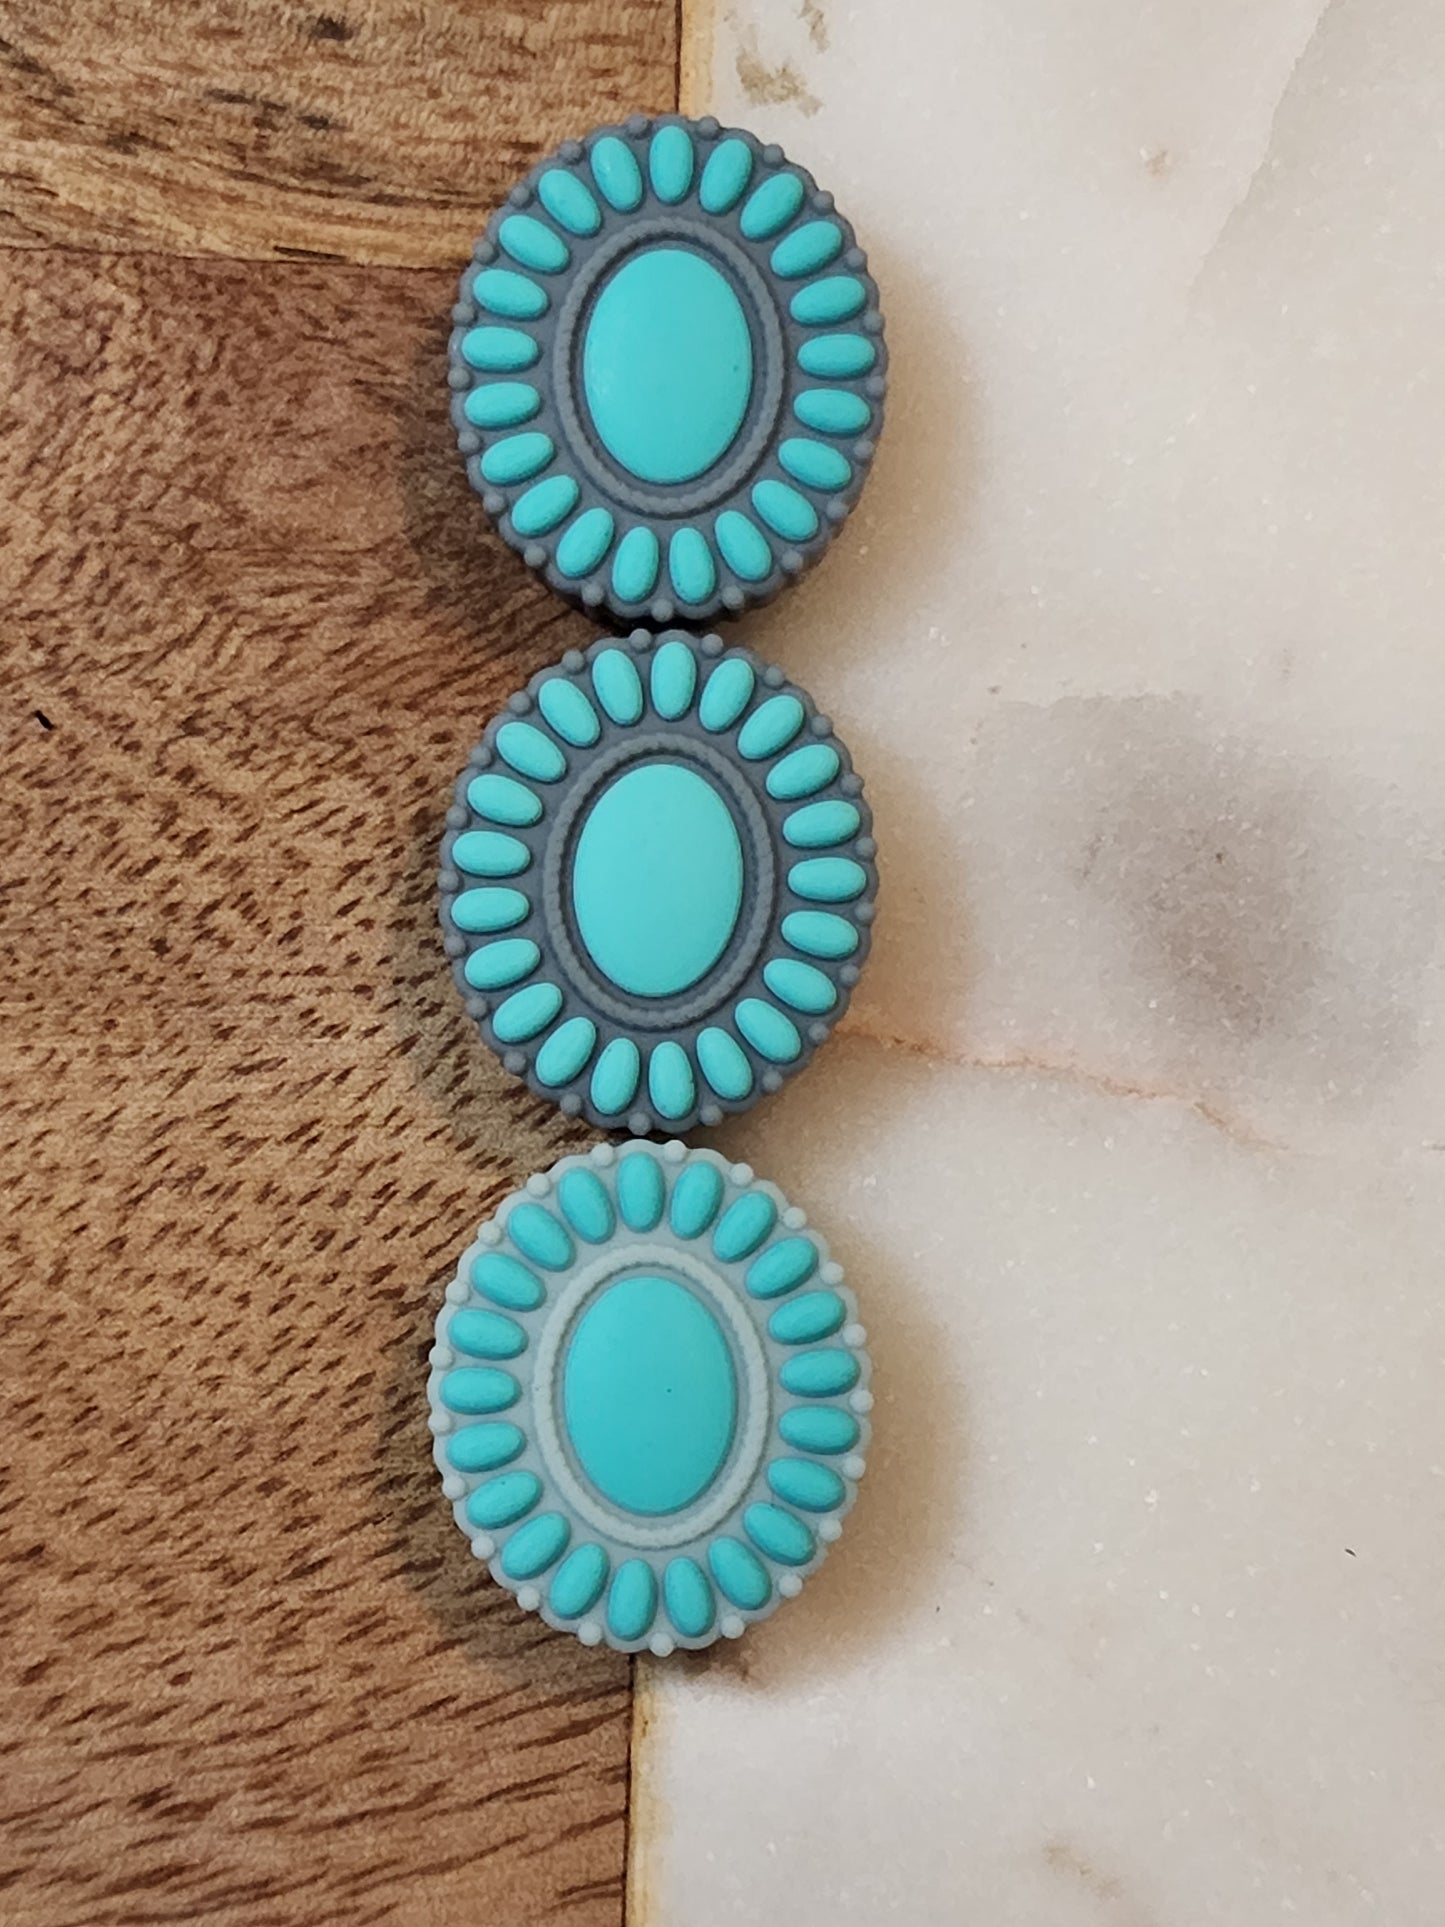 DAISYLAND EXCLUSIVE CUSTOM design concho jewelry turquoise western pendant silicone focal bead-B17